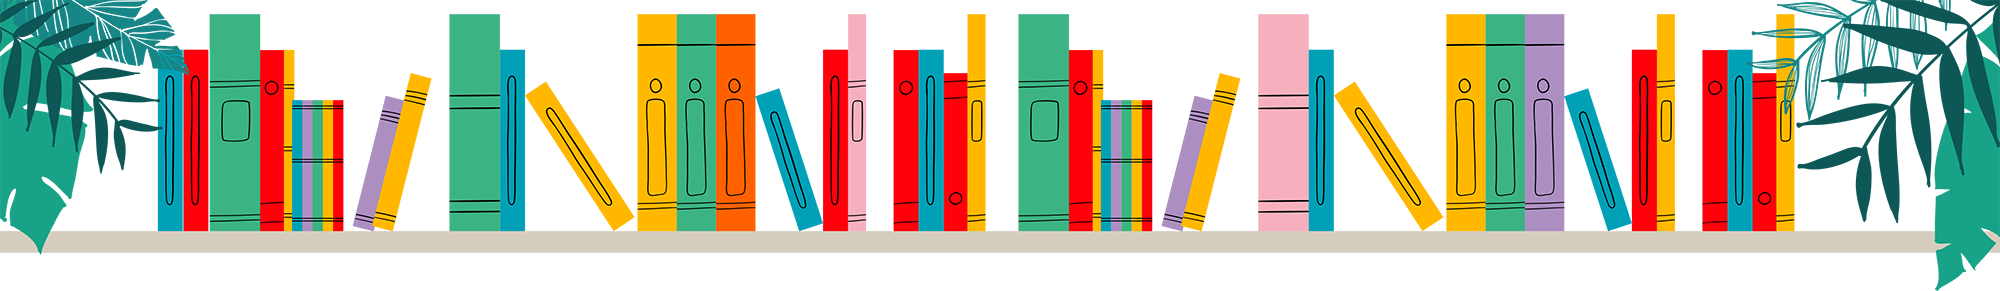 A graphic with books.